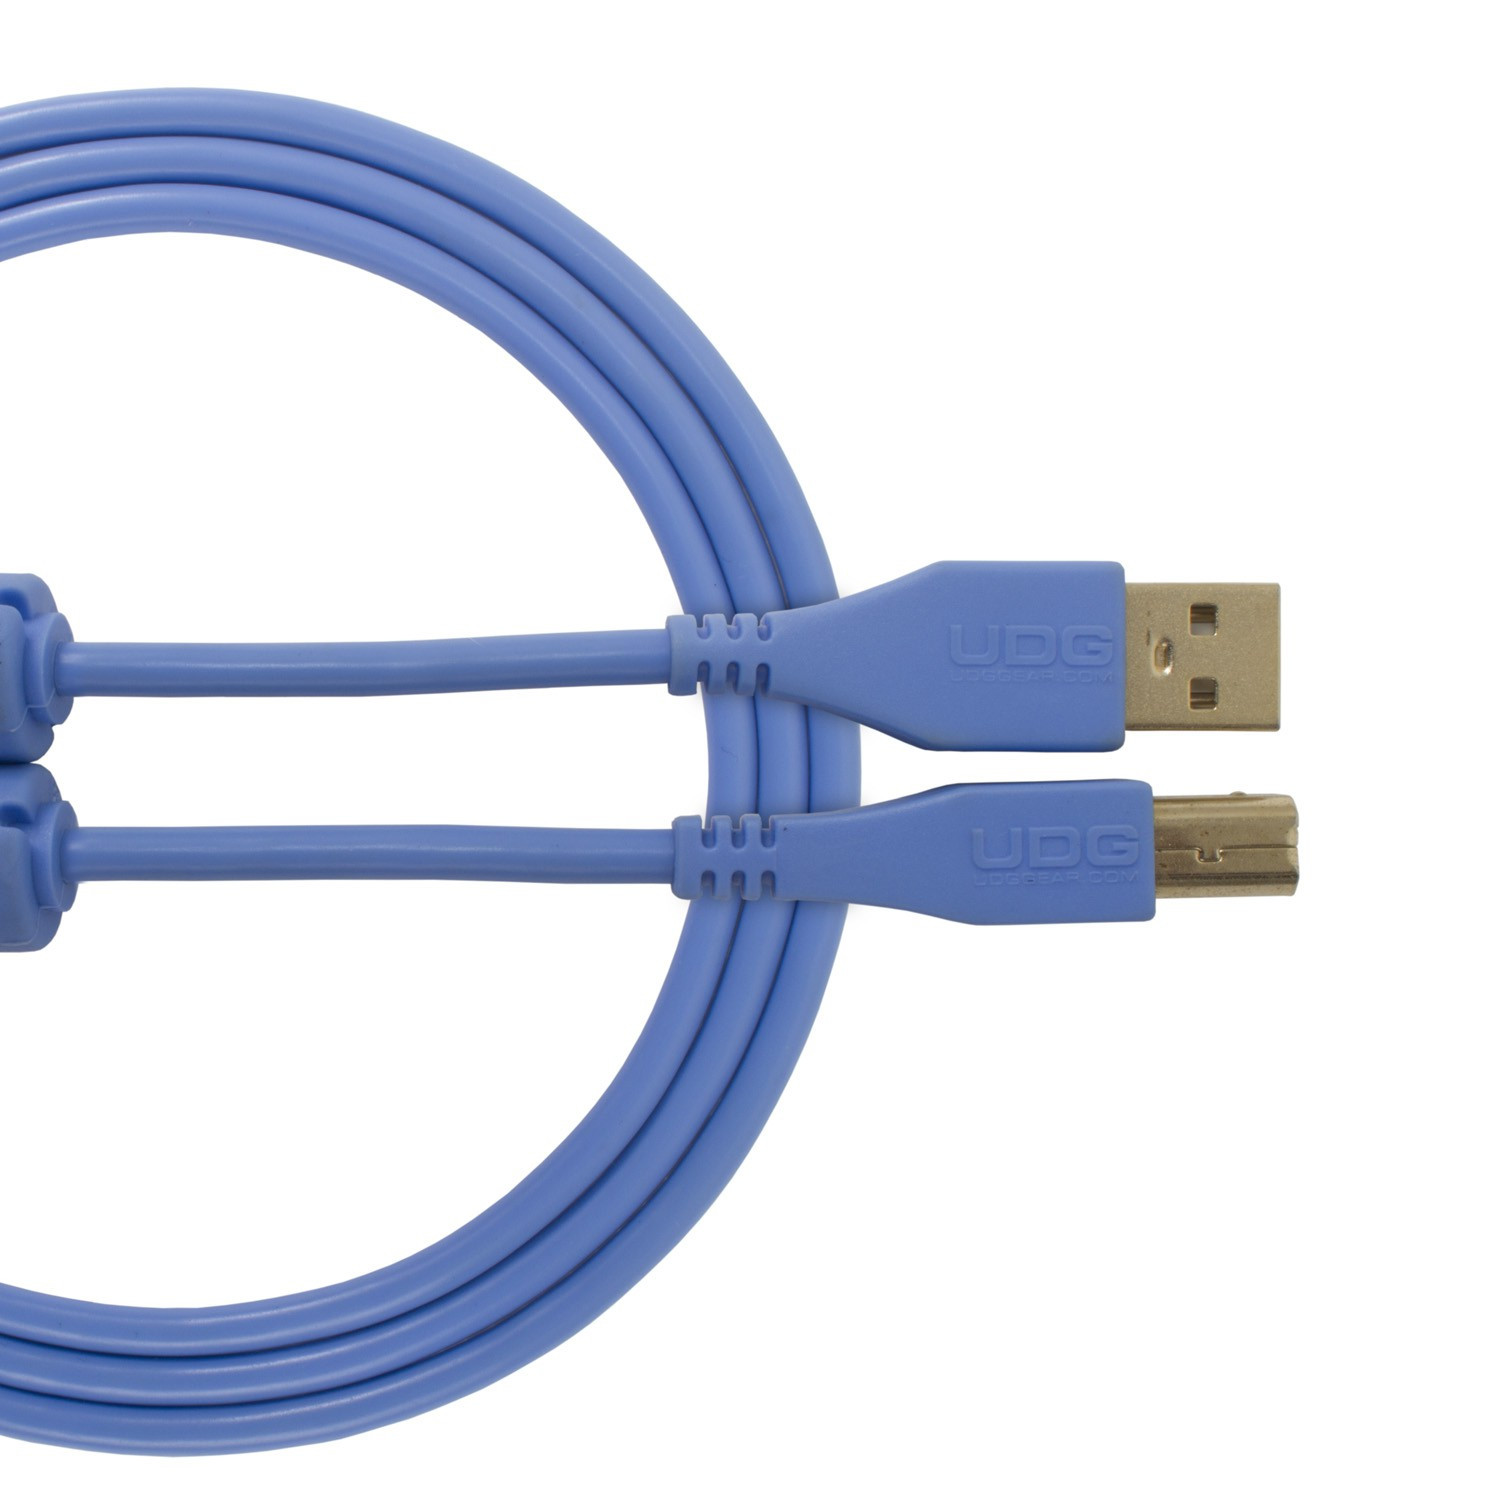 UDG Ultimate Audio Cable USB 2.0 A-B Blue Straight 3m